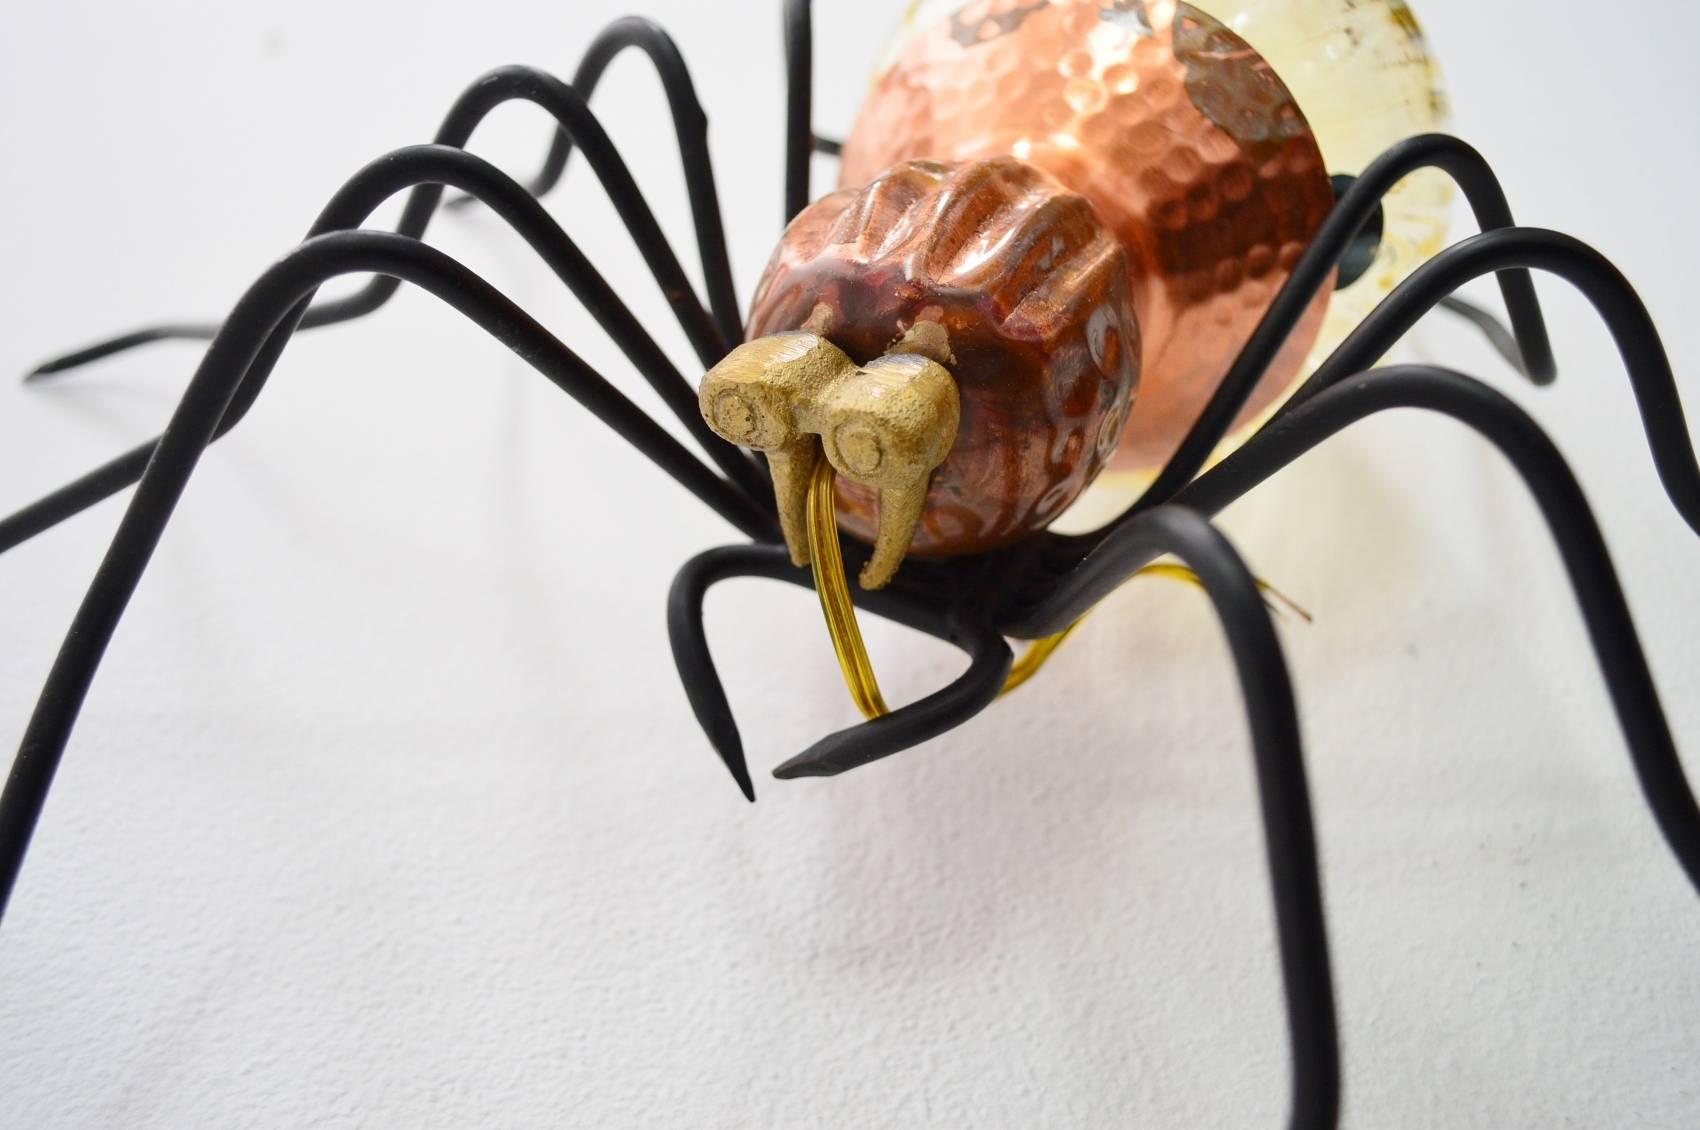 Gorgeous spider lamp, made in Italy, circa 1960s.
This lamp is a typical outdoor lamp mounted over the entrance door of Italian houses of the 1960s. Nowadays they are requested design objects to be used also indoor.
Made of solid iron (painted)